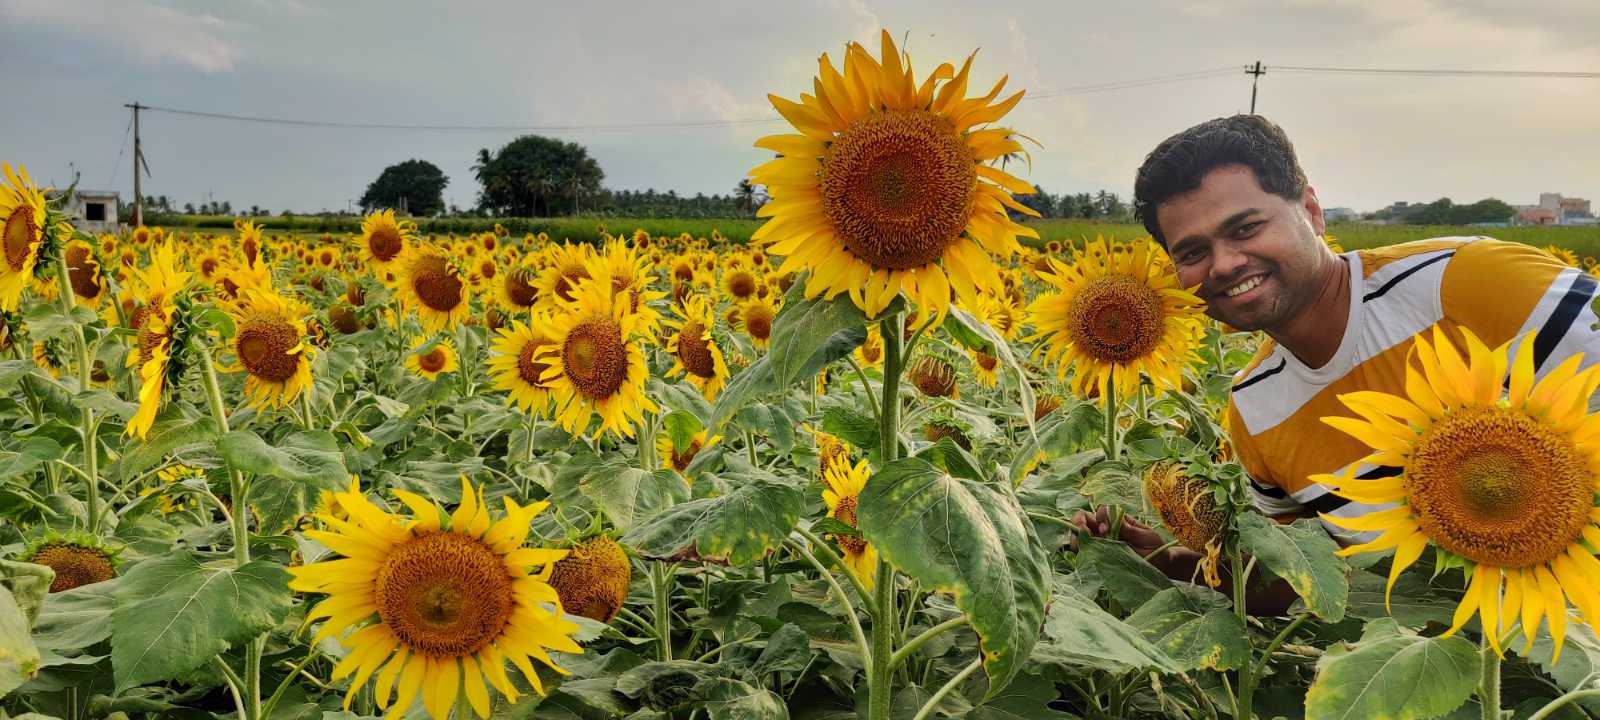 You are currently viewing Sundarapandiapuram sunflower fields(Exact locations, tips)